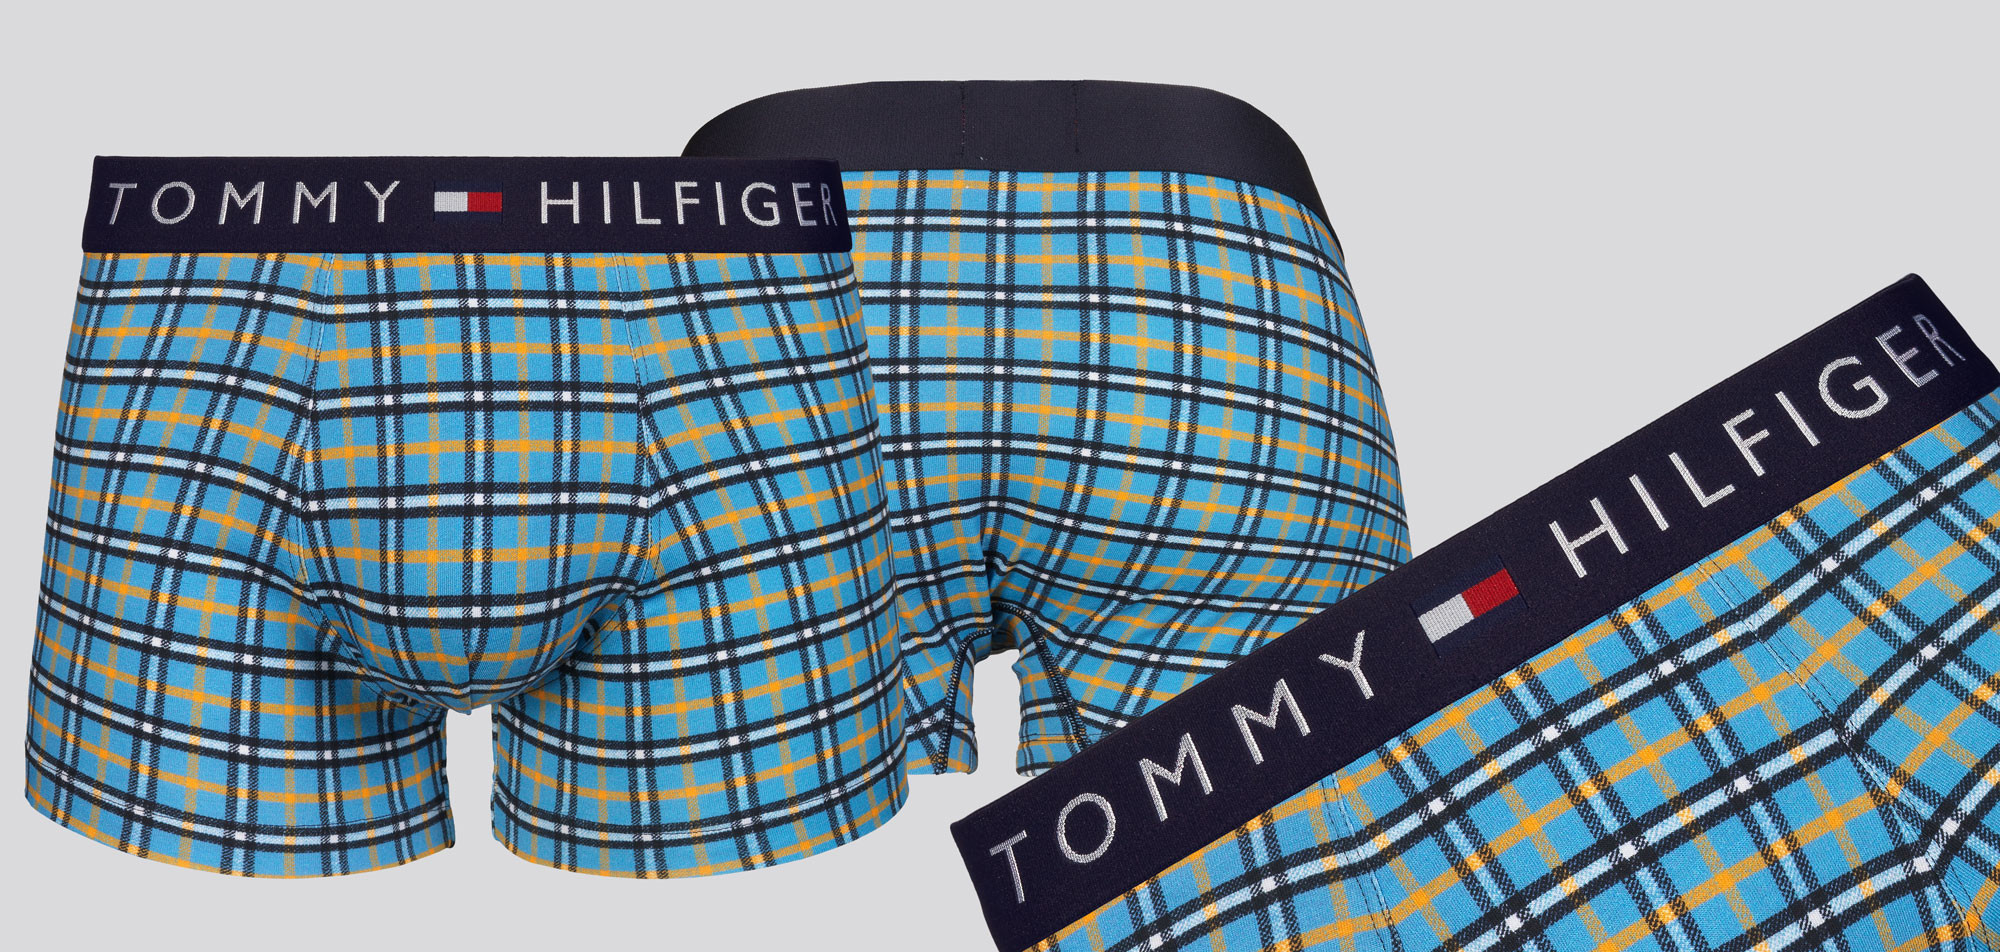 Tommy Hilfiger Trunk 835 Print, color Nee